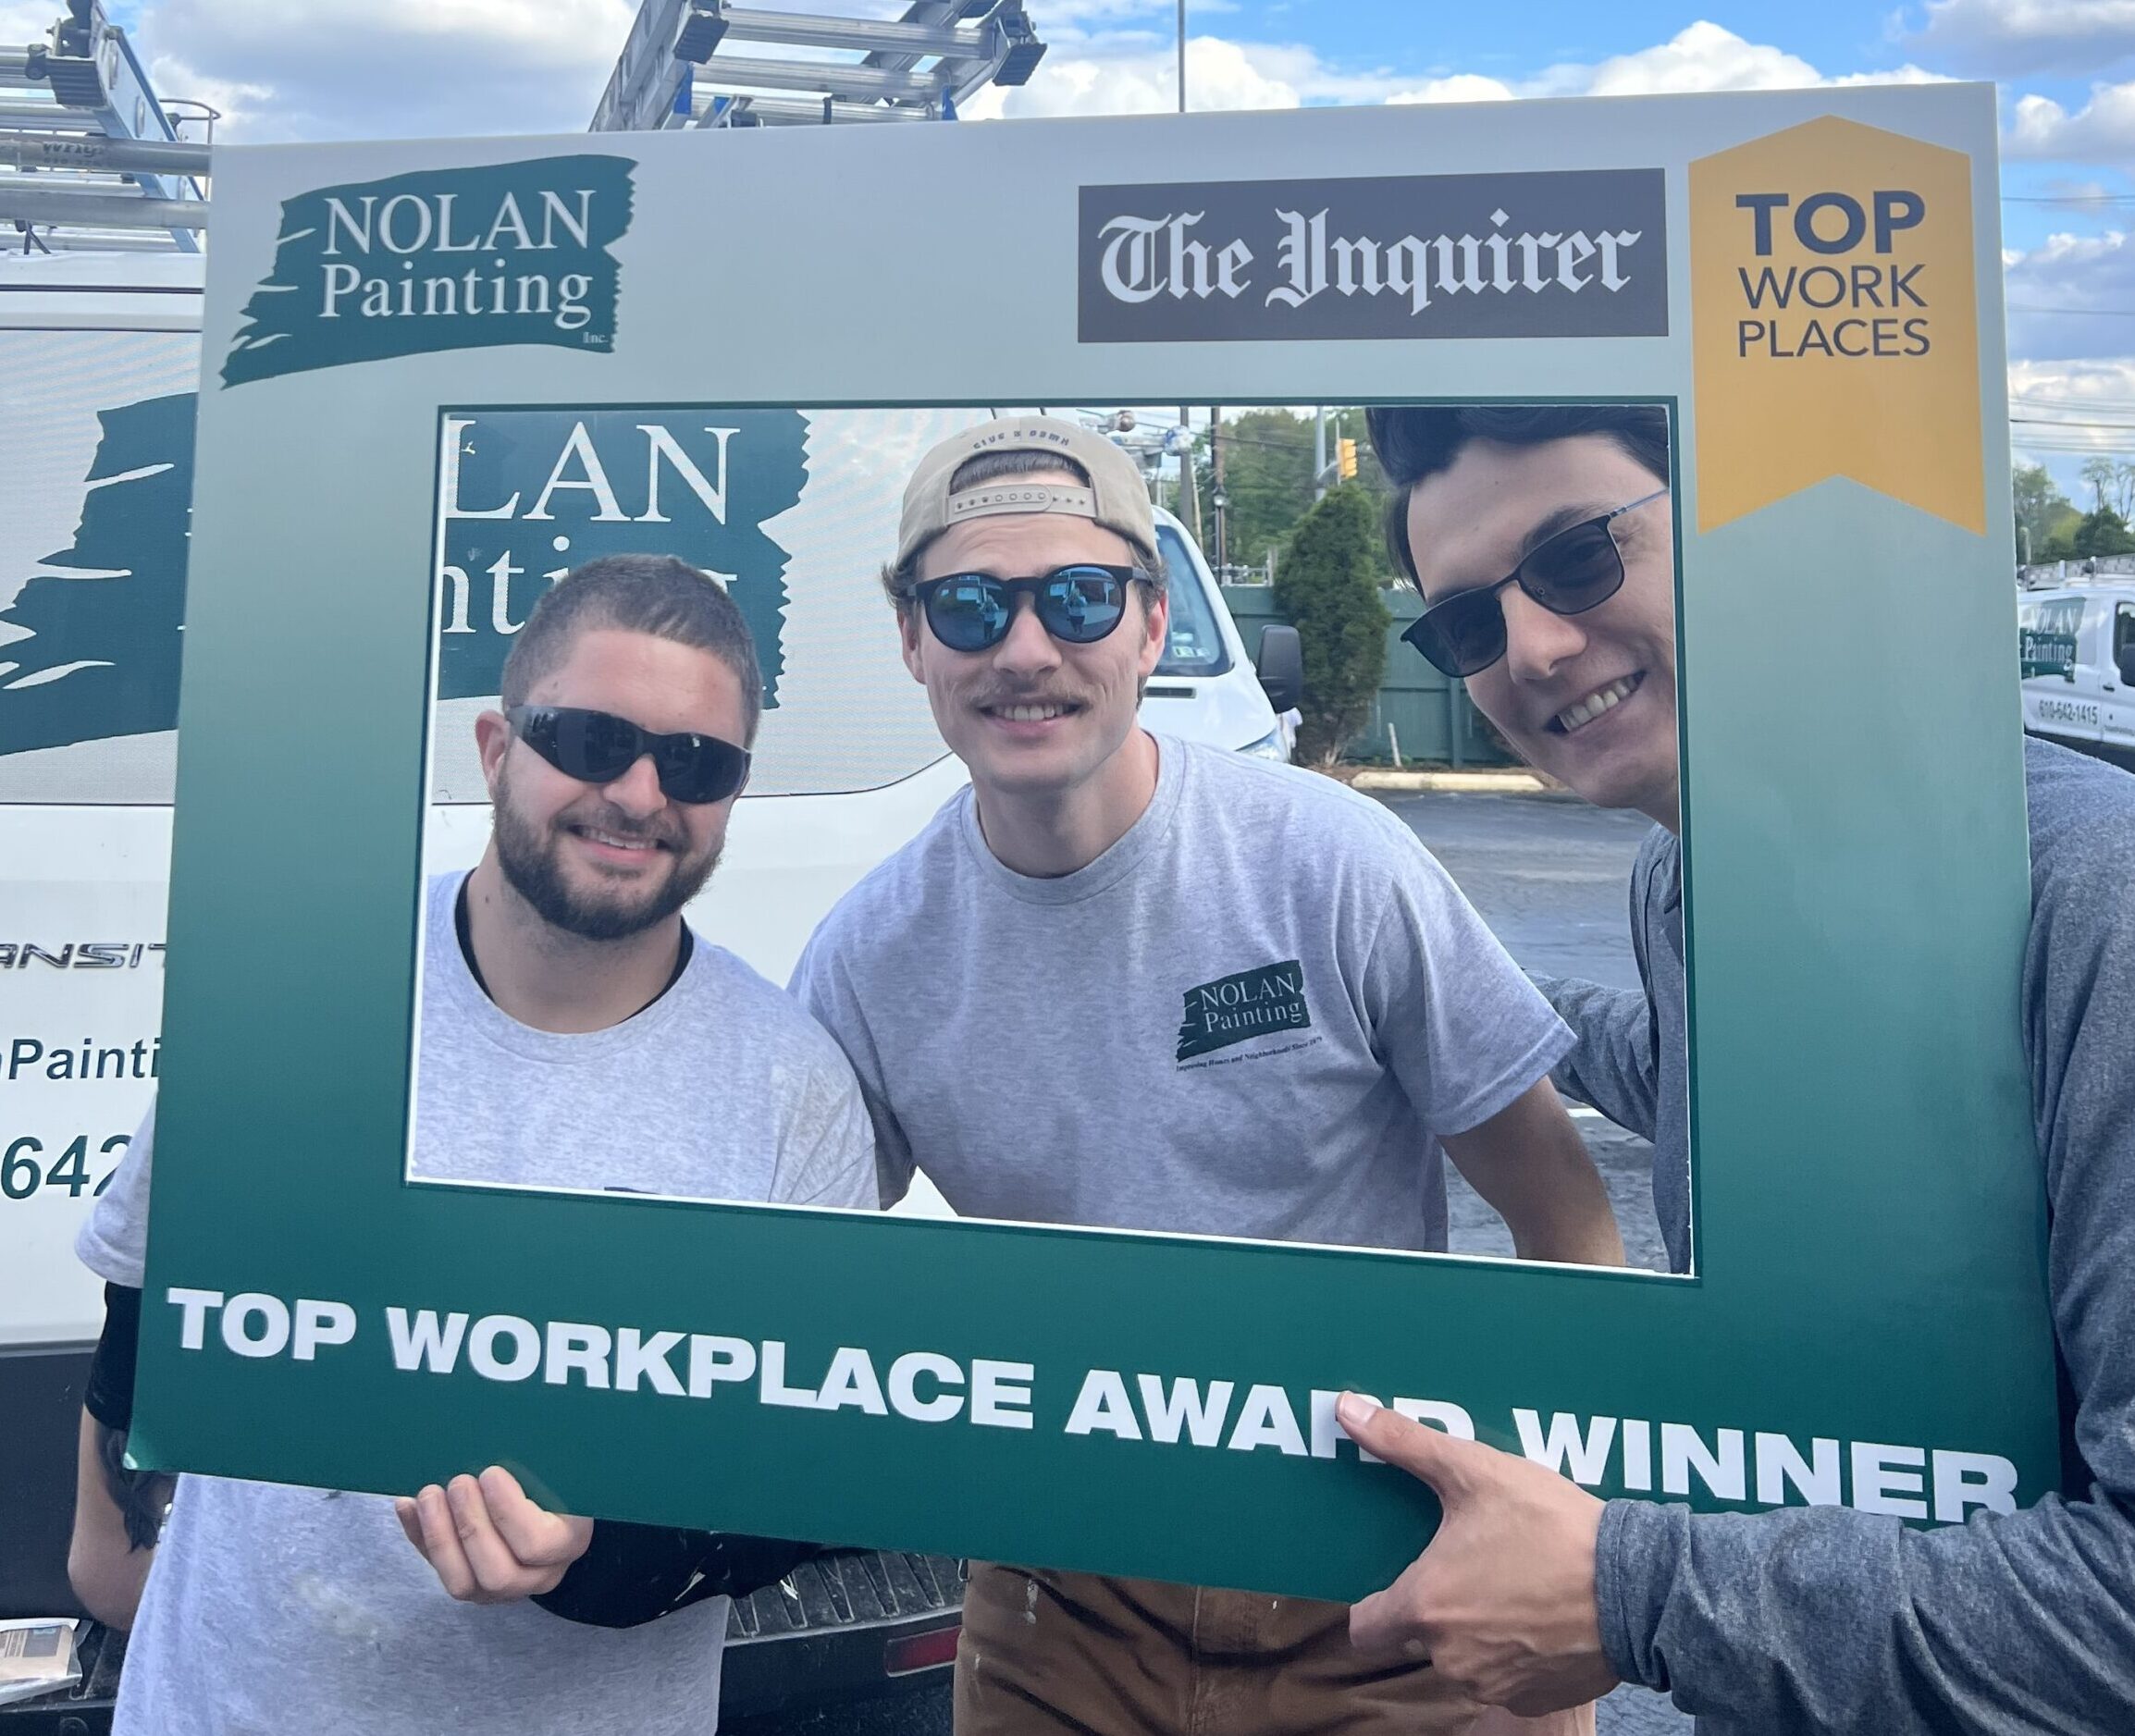 Top places to work- Nolan Painting Company in Philadelphia